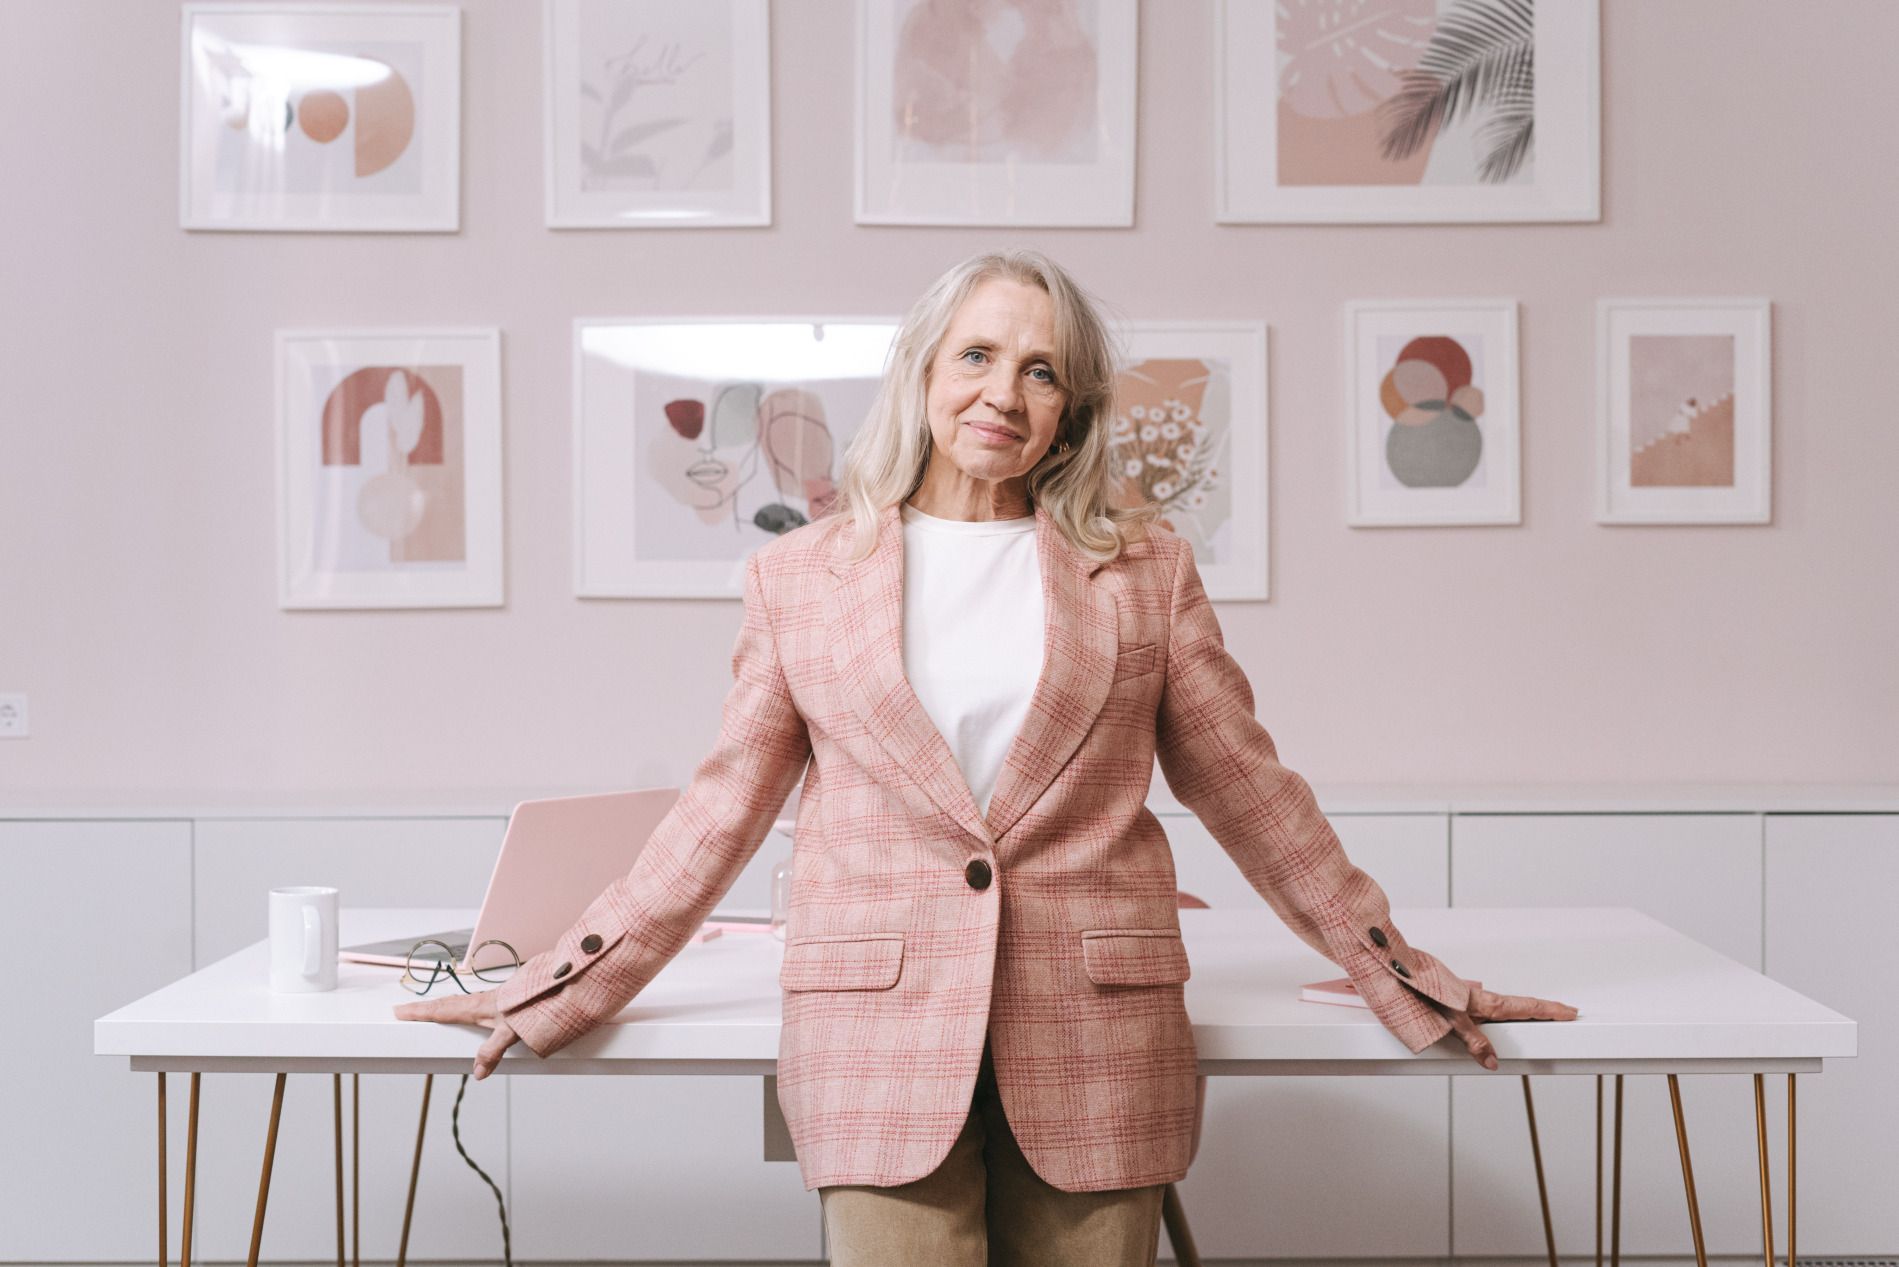 Fashion Over 50: Our 25 Favorite Fashion Bloggers You Should Follow